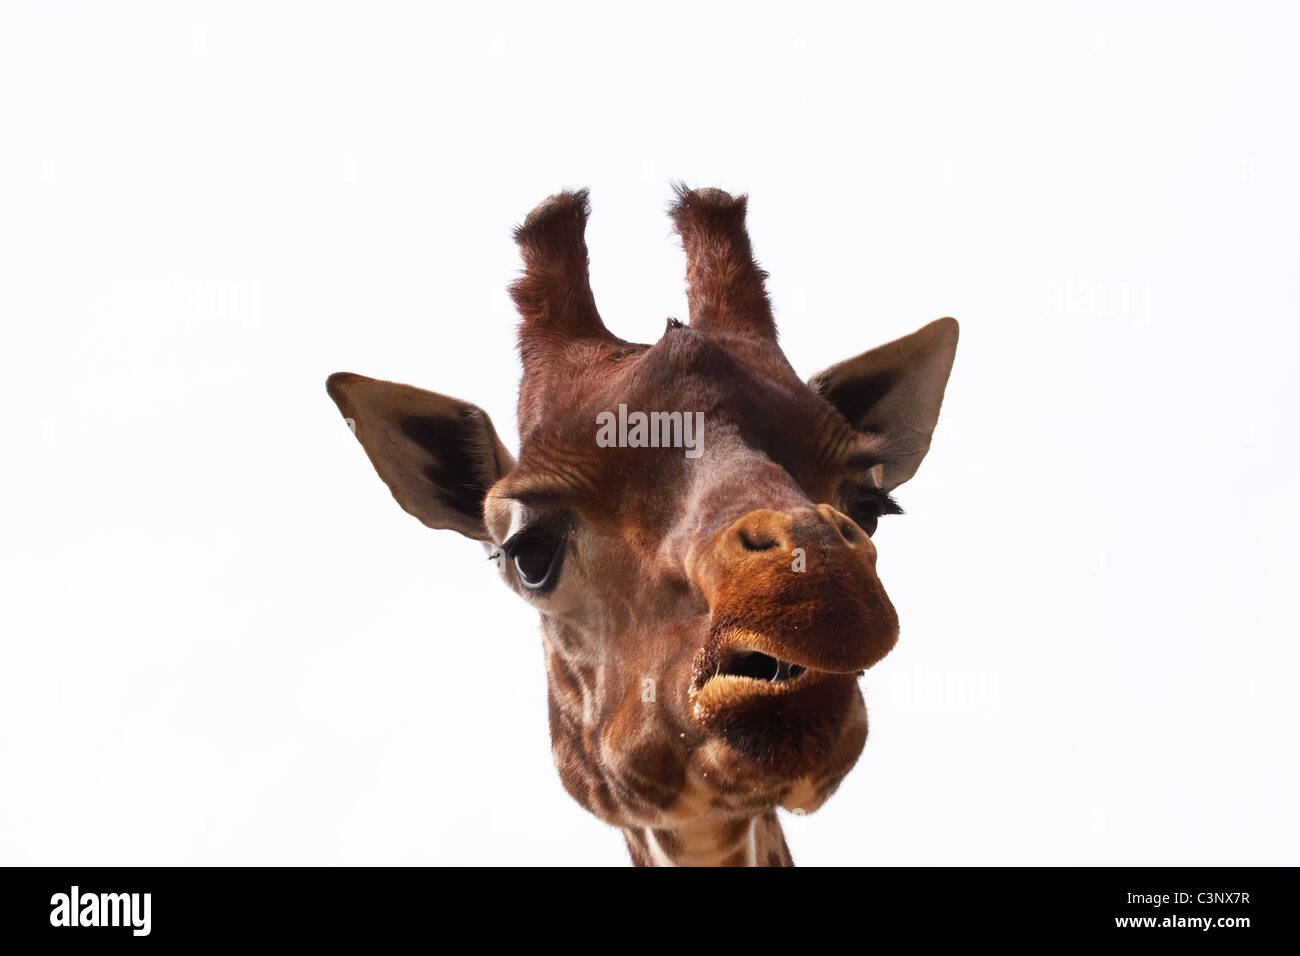 Giraffe head with funny expression Stock Photo